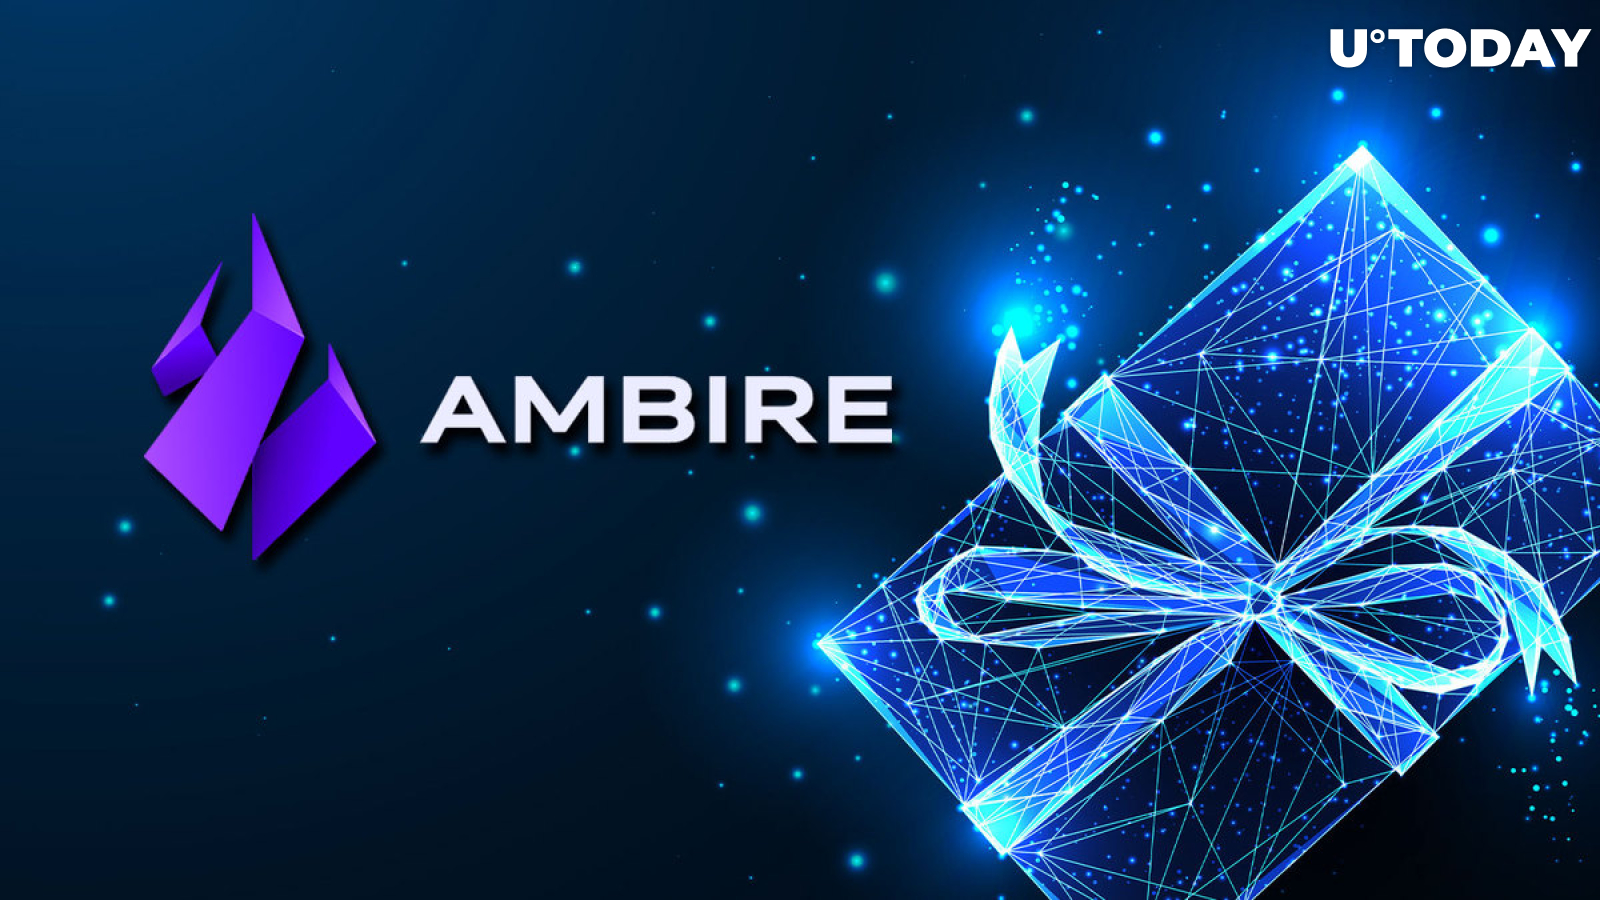 Ambire Wallet Integrates swappin.gifts Solution, Launches Celebration Promo